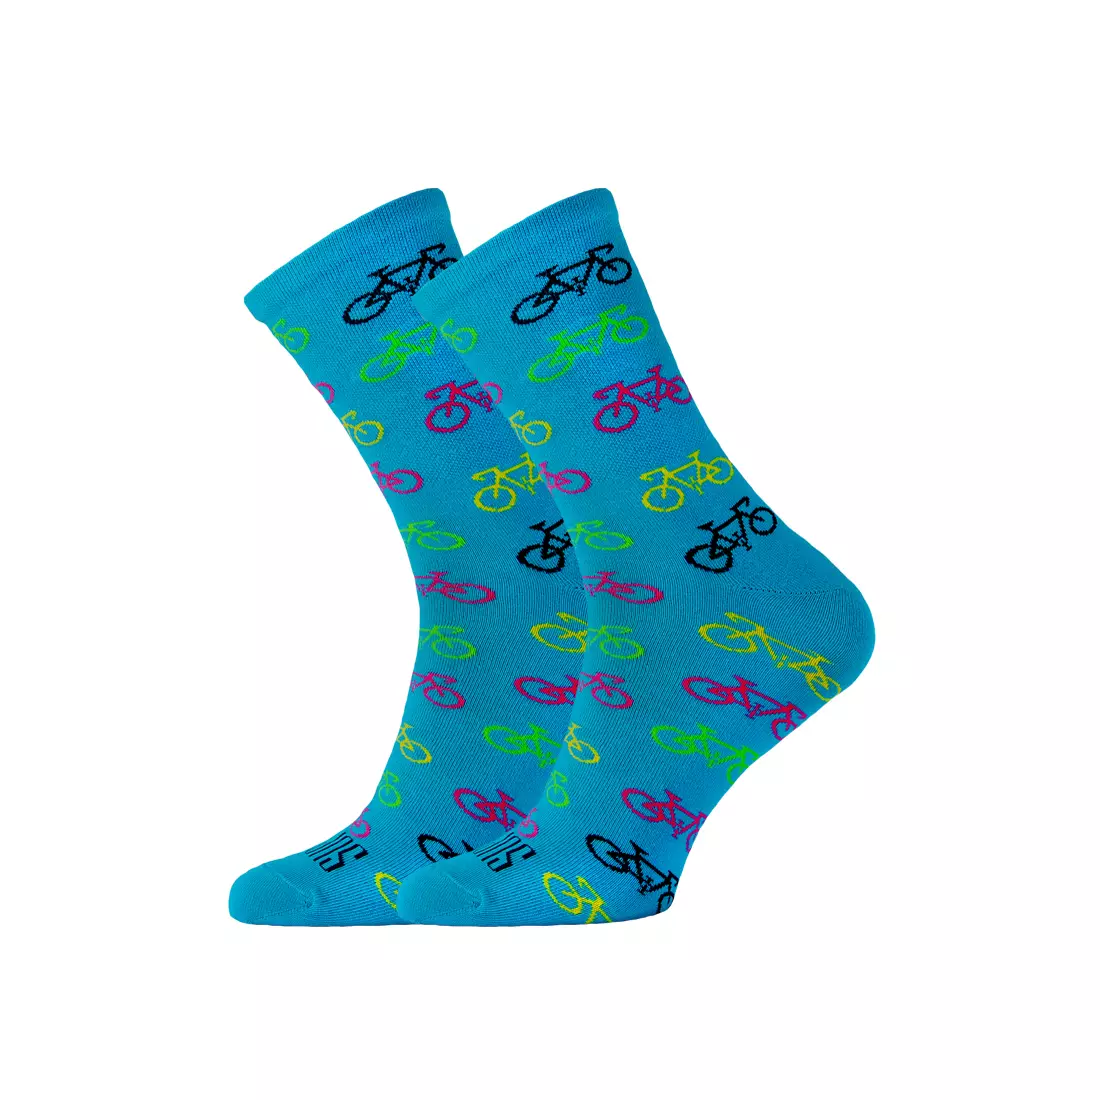 SUPPORTSPORT socks CYCLING PASSION blue